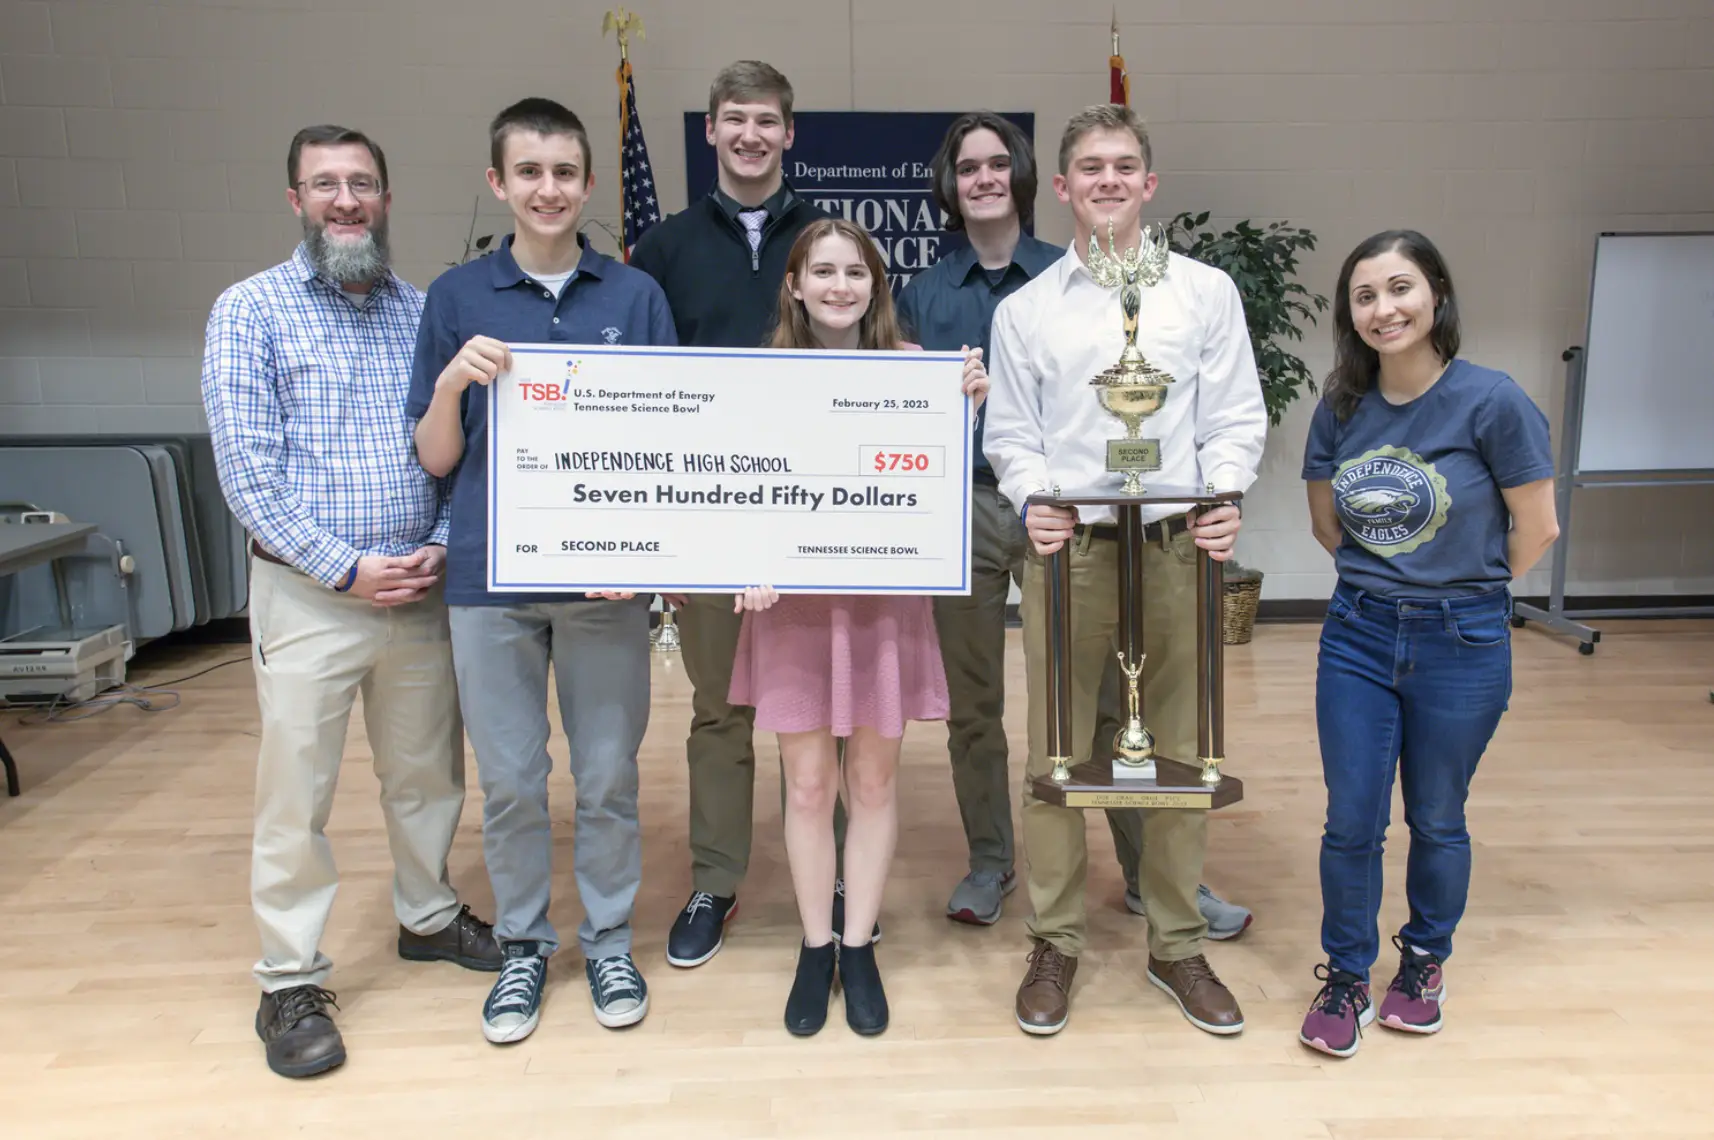 Tennessee Science Bowl second place - Independence High School